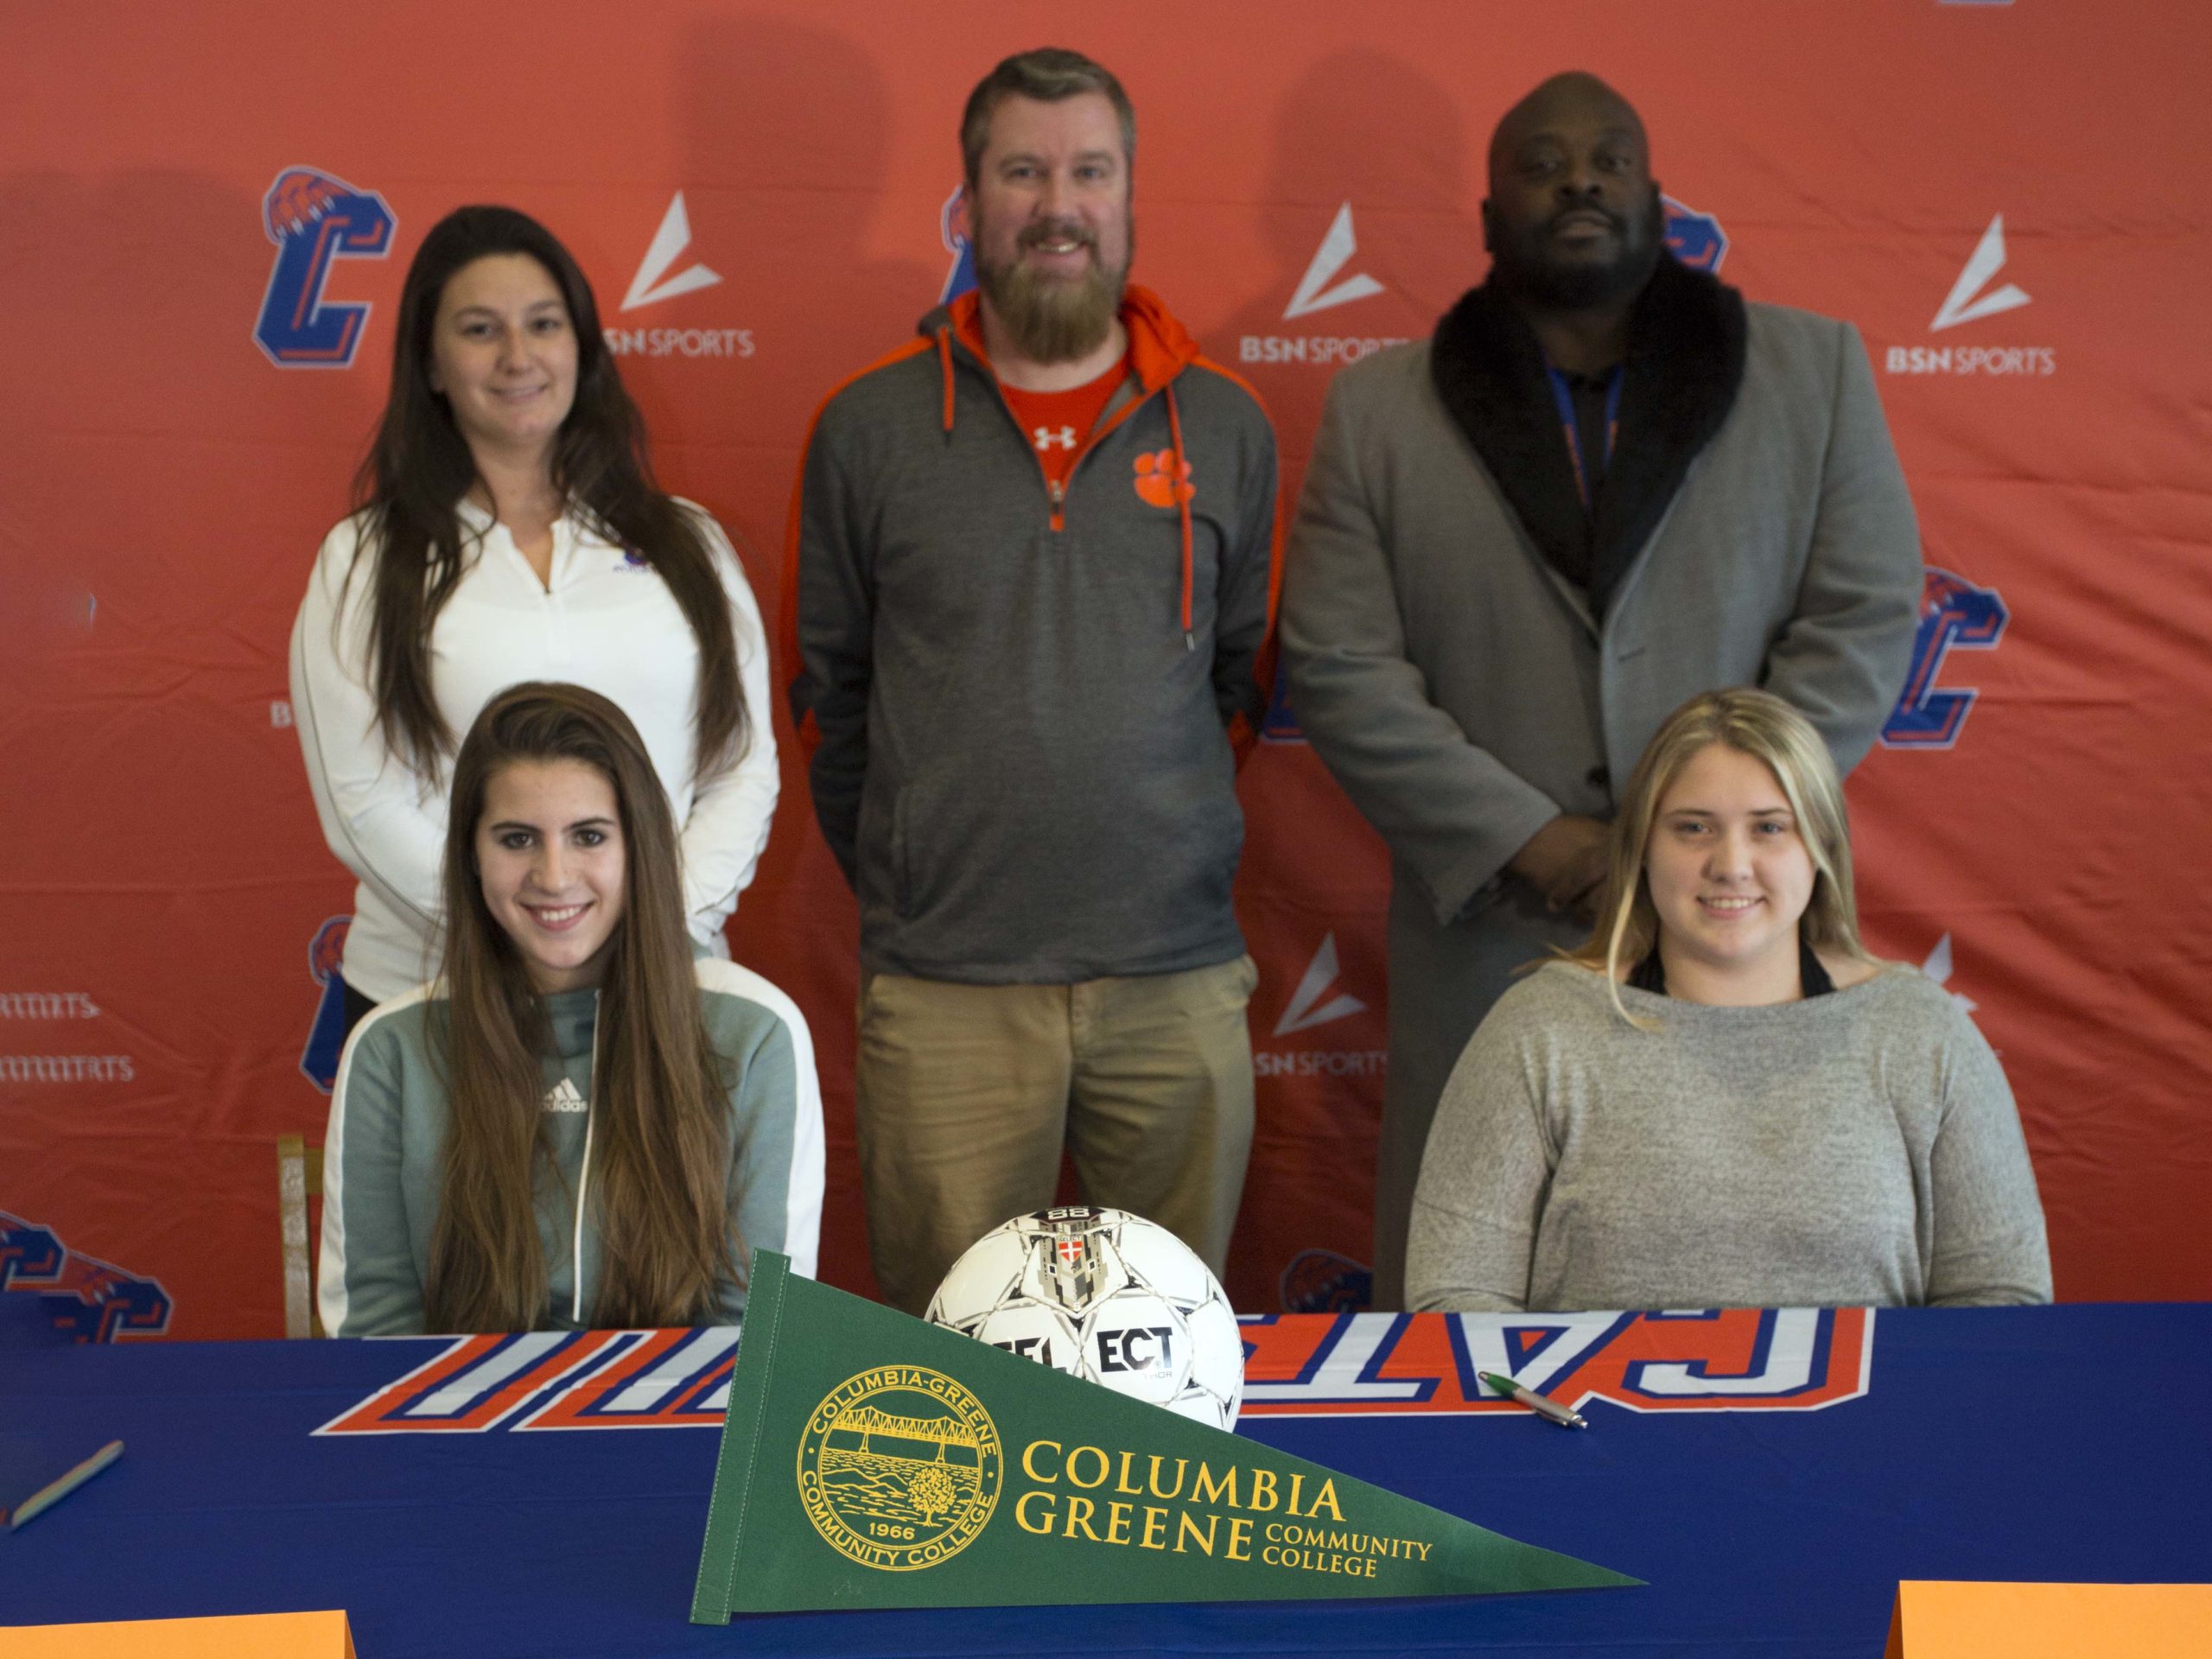 Laura Christman and Kelsey Lackie with Catskill coach Coach Caitlyn Dodig, athletic director Eric Joyce, and superintdent Dr. Ronel Cook